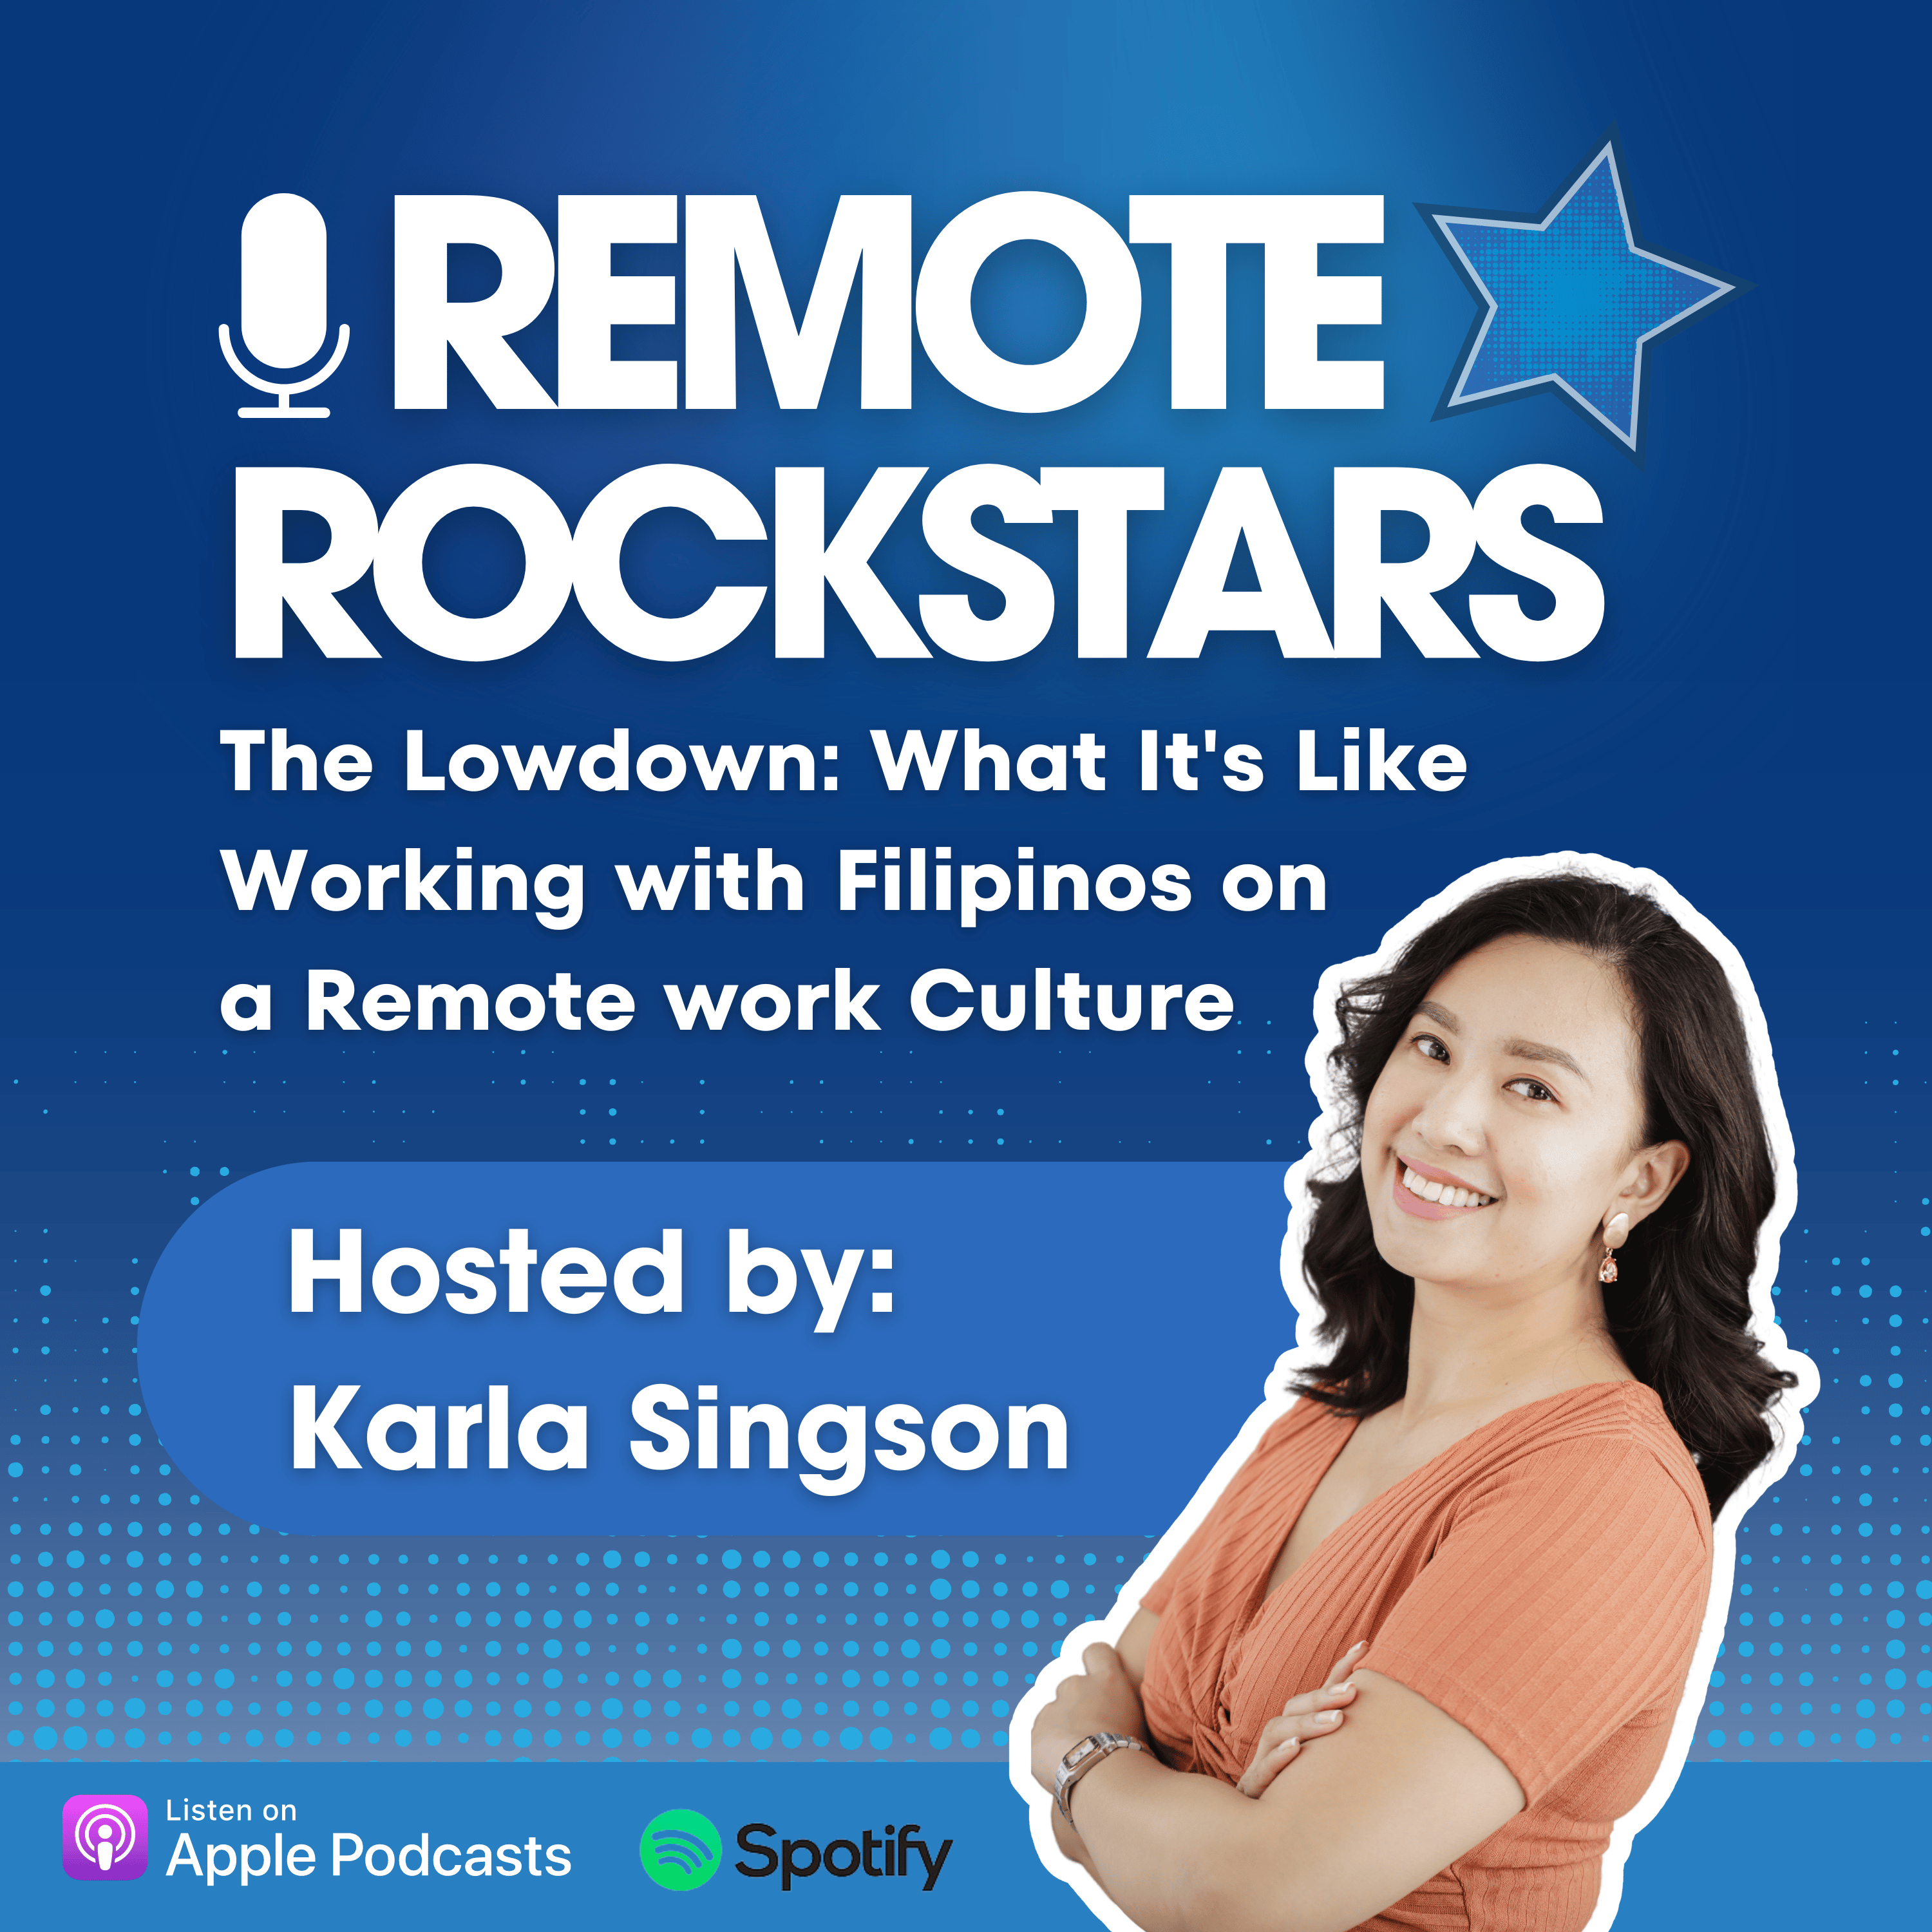 The Lowdown: What It's Like Working with Filipinos on a Remote work Culture